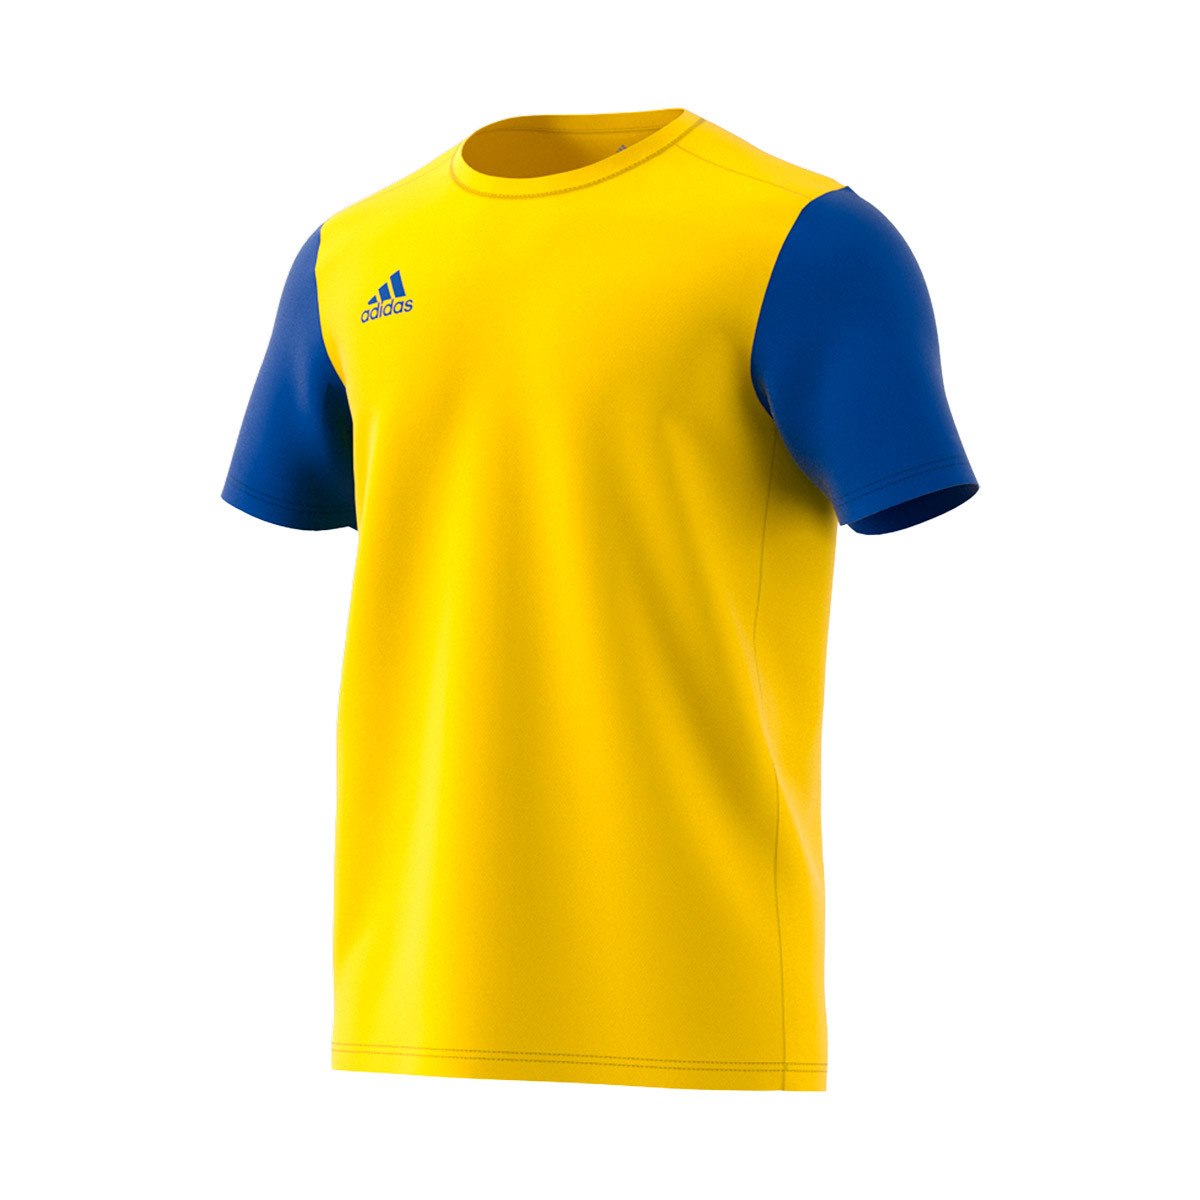 jersey blue and yellow